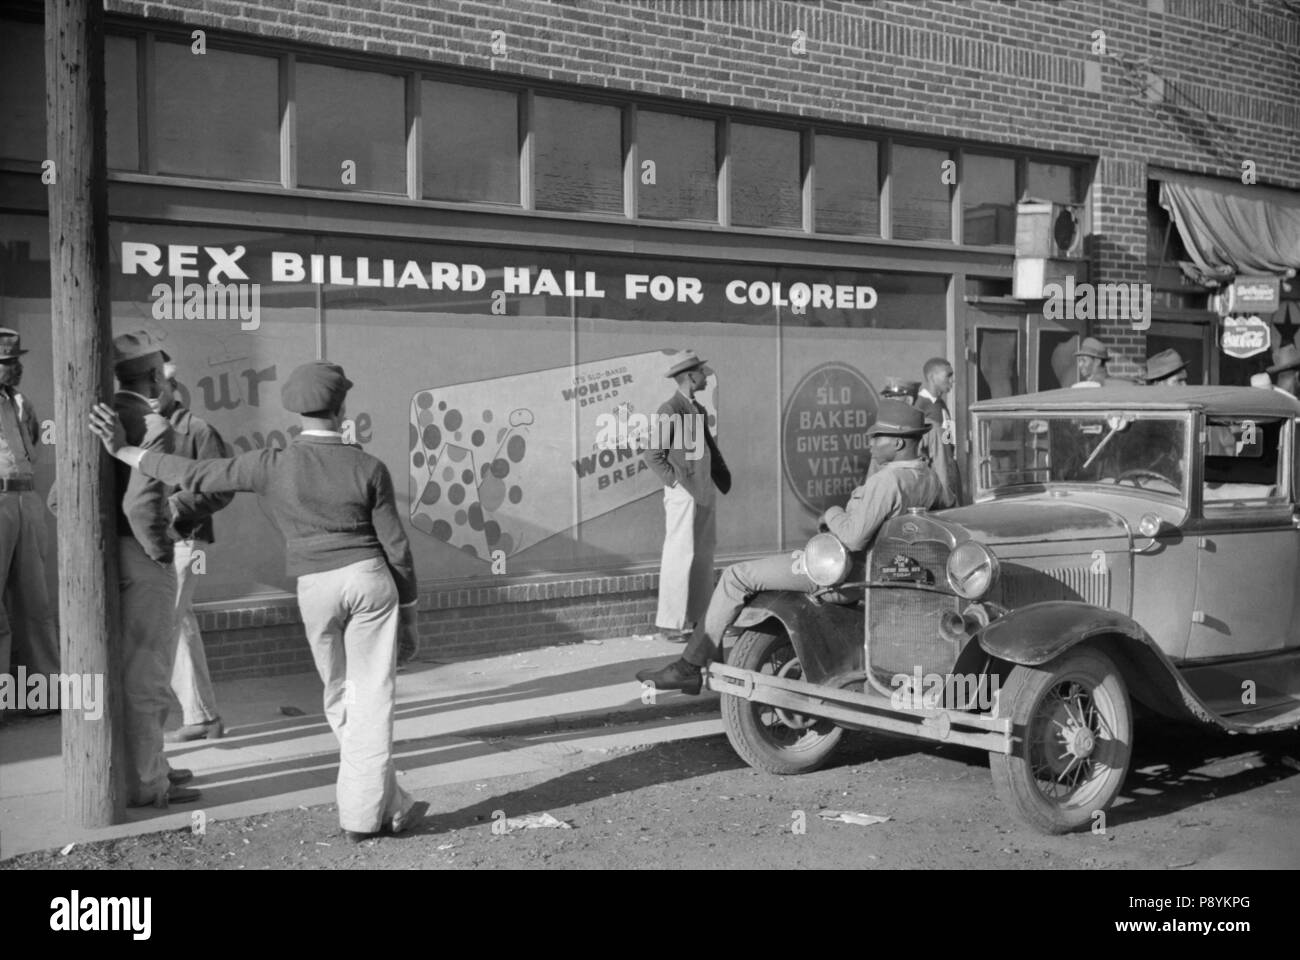 Rex Billiard Hall for Colored, Beale Street, Memphis, Tennessee, USA, Marion Post Wolcott, Farm Security Administration, October 1939 Stock Photo